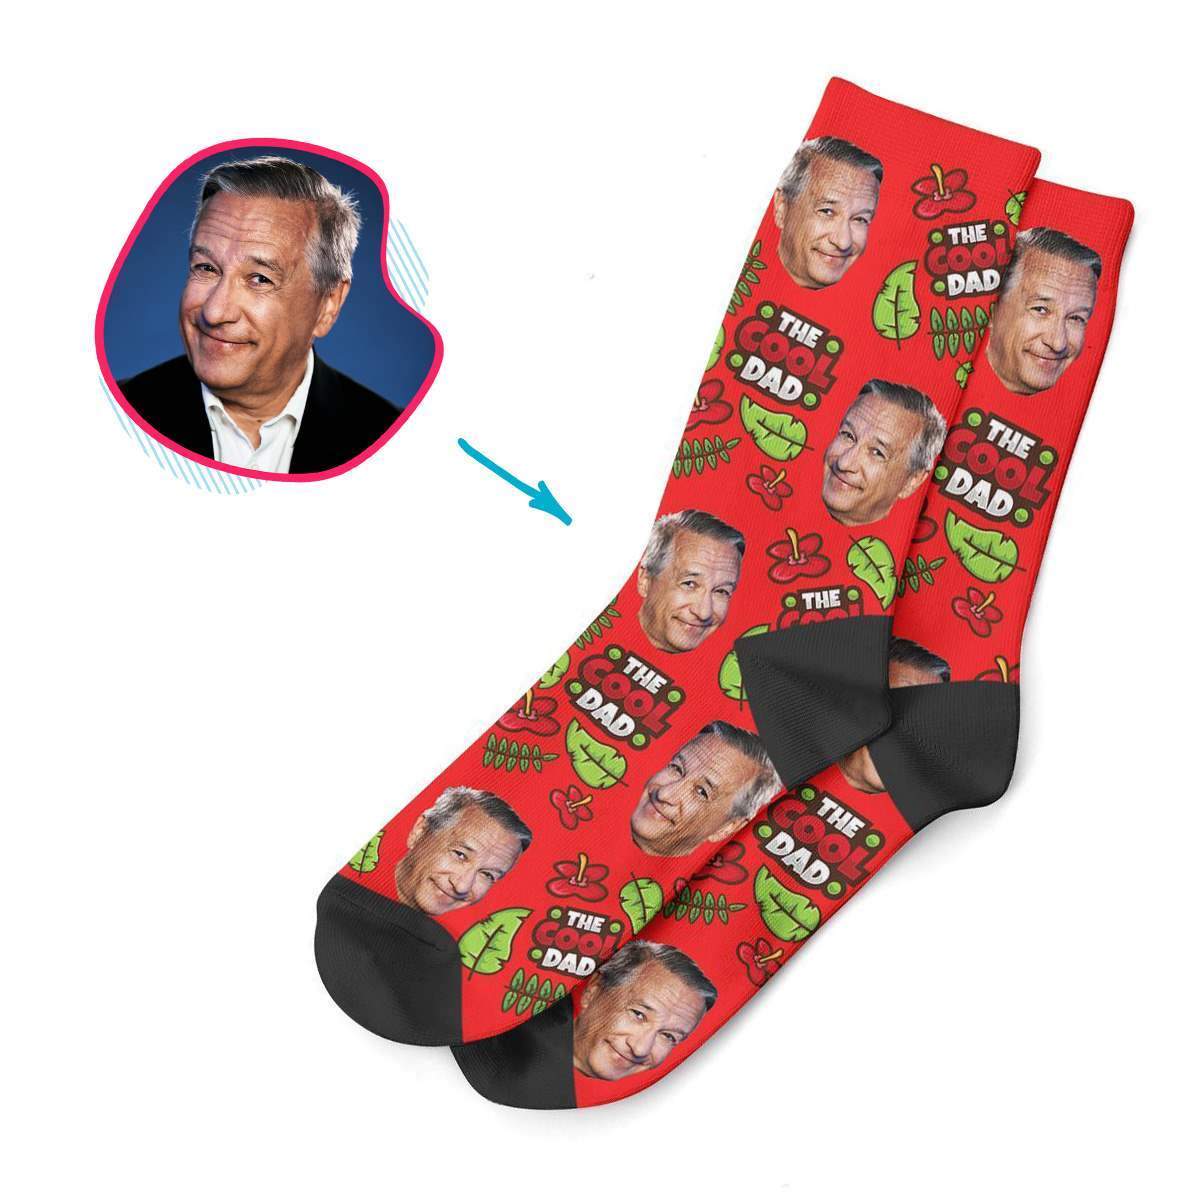 The Cool Dad Personalized Socks